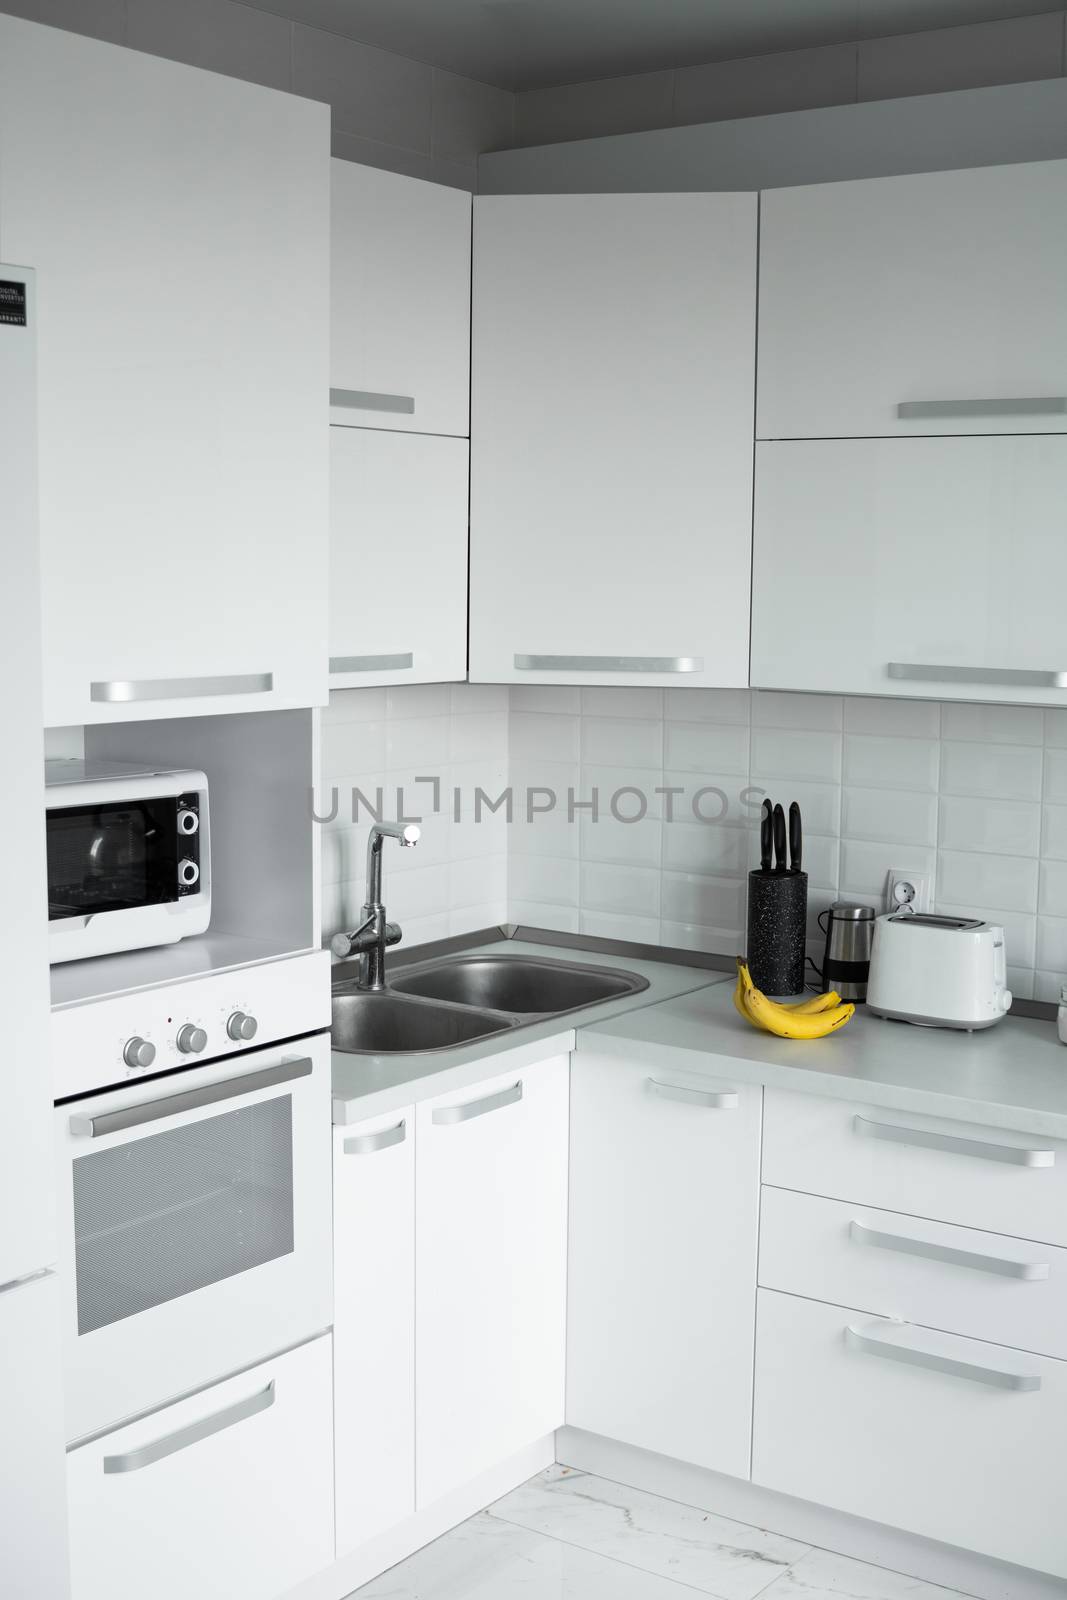 Comfortable white kitchen with a white lacquered facades. Modern kitchen clean interior design. Refrigerator, kitchen oven, microwave oven and sink. Kitchen supplies